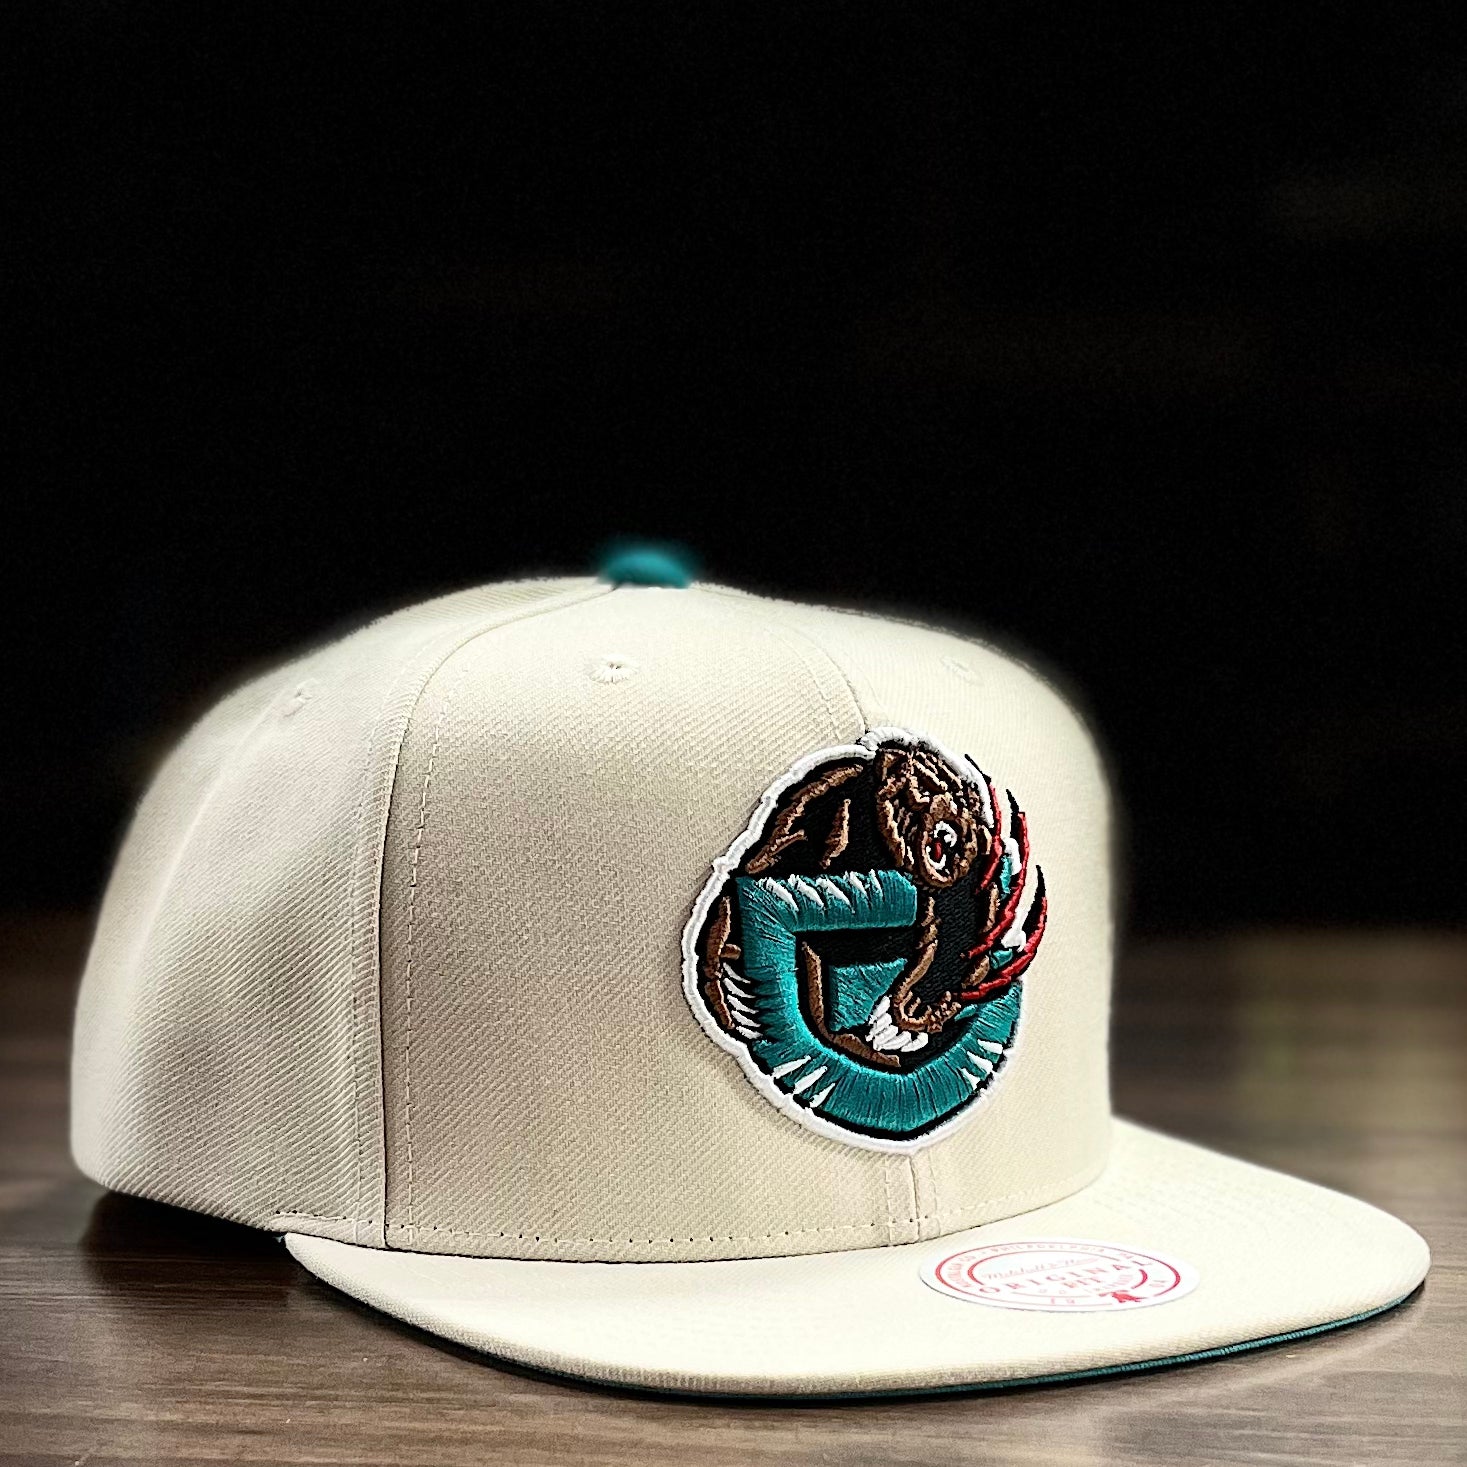 Vancouver grizzlies Mitchell and ness fitted hat